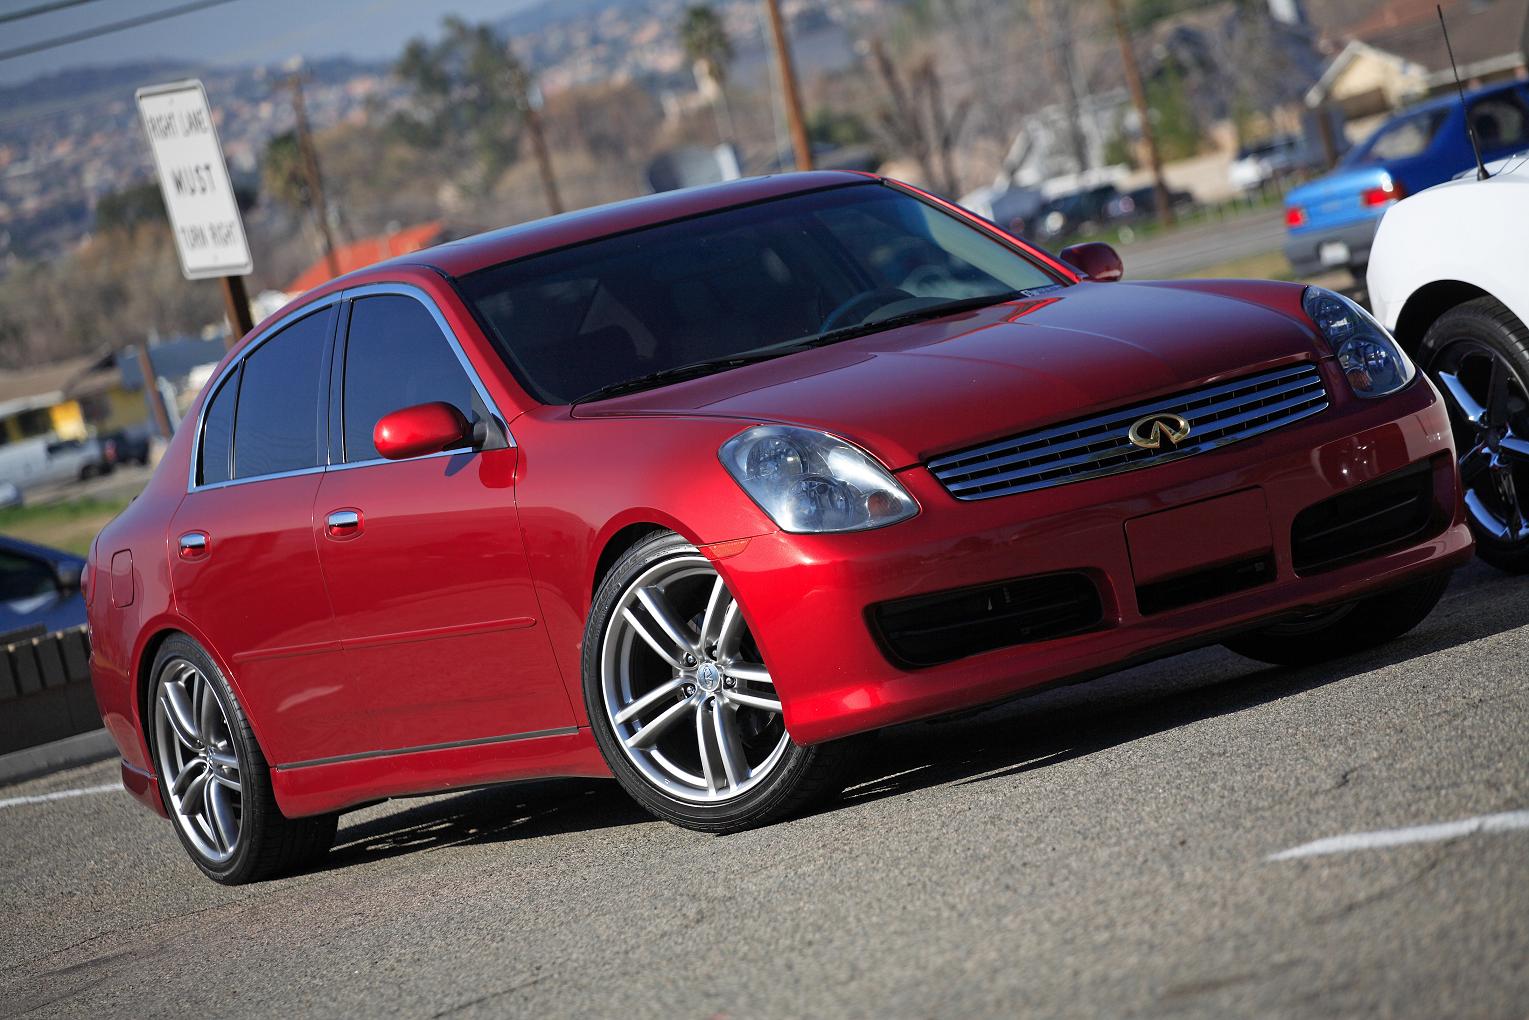 Official* G35 Modded Sedan Picture Thread.